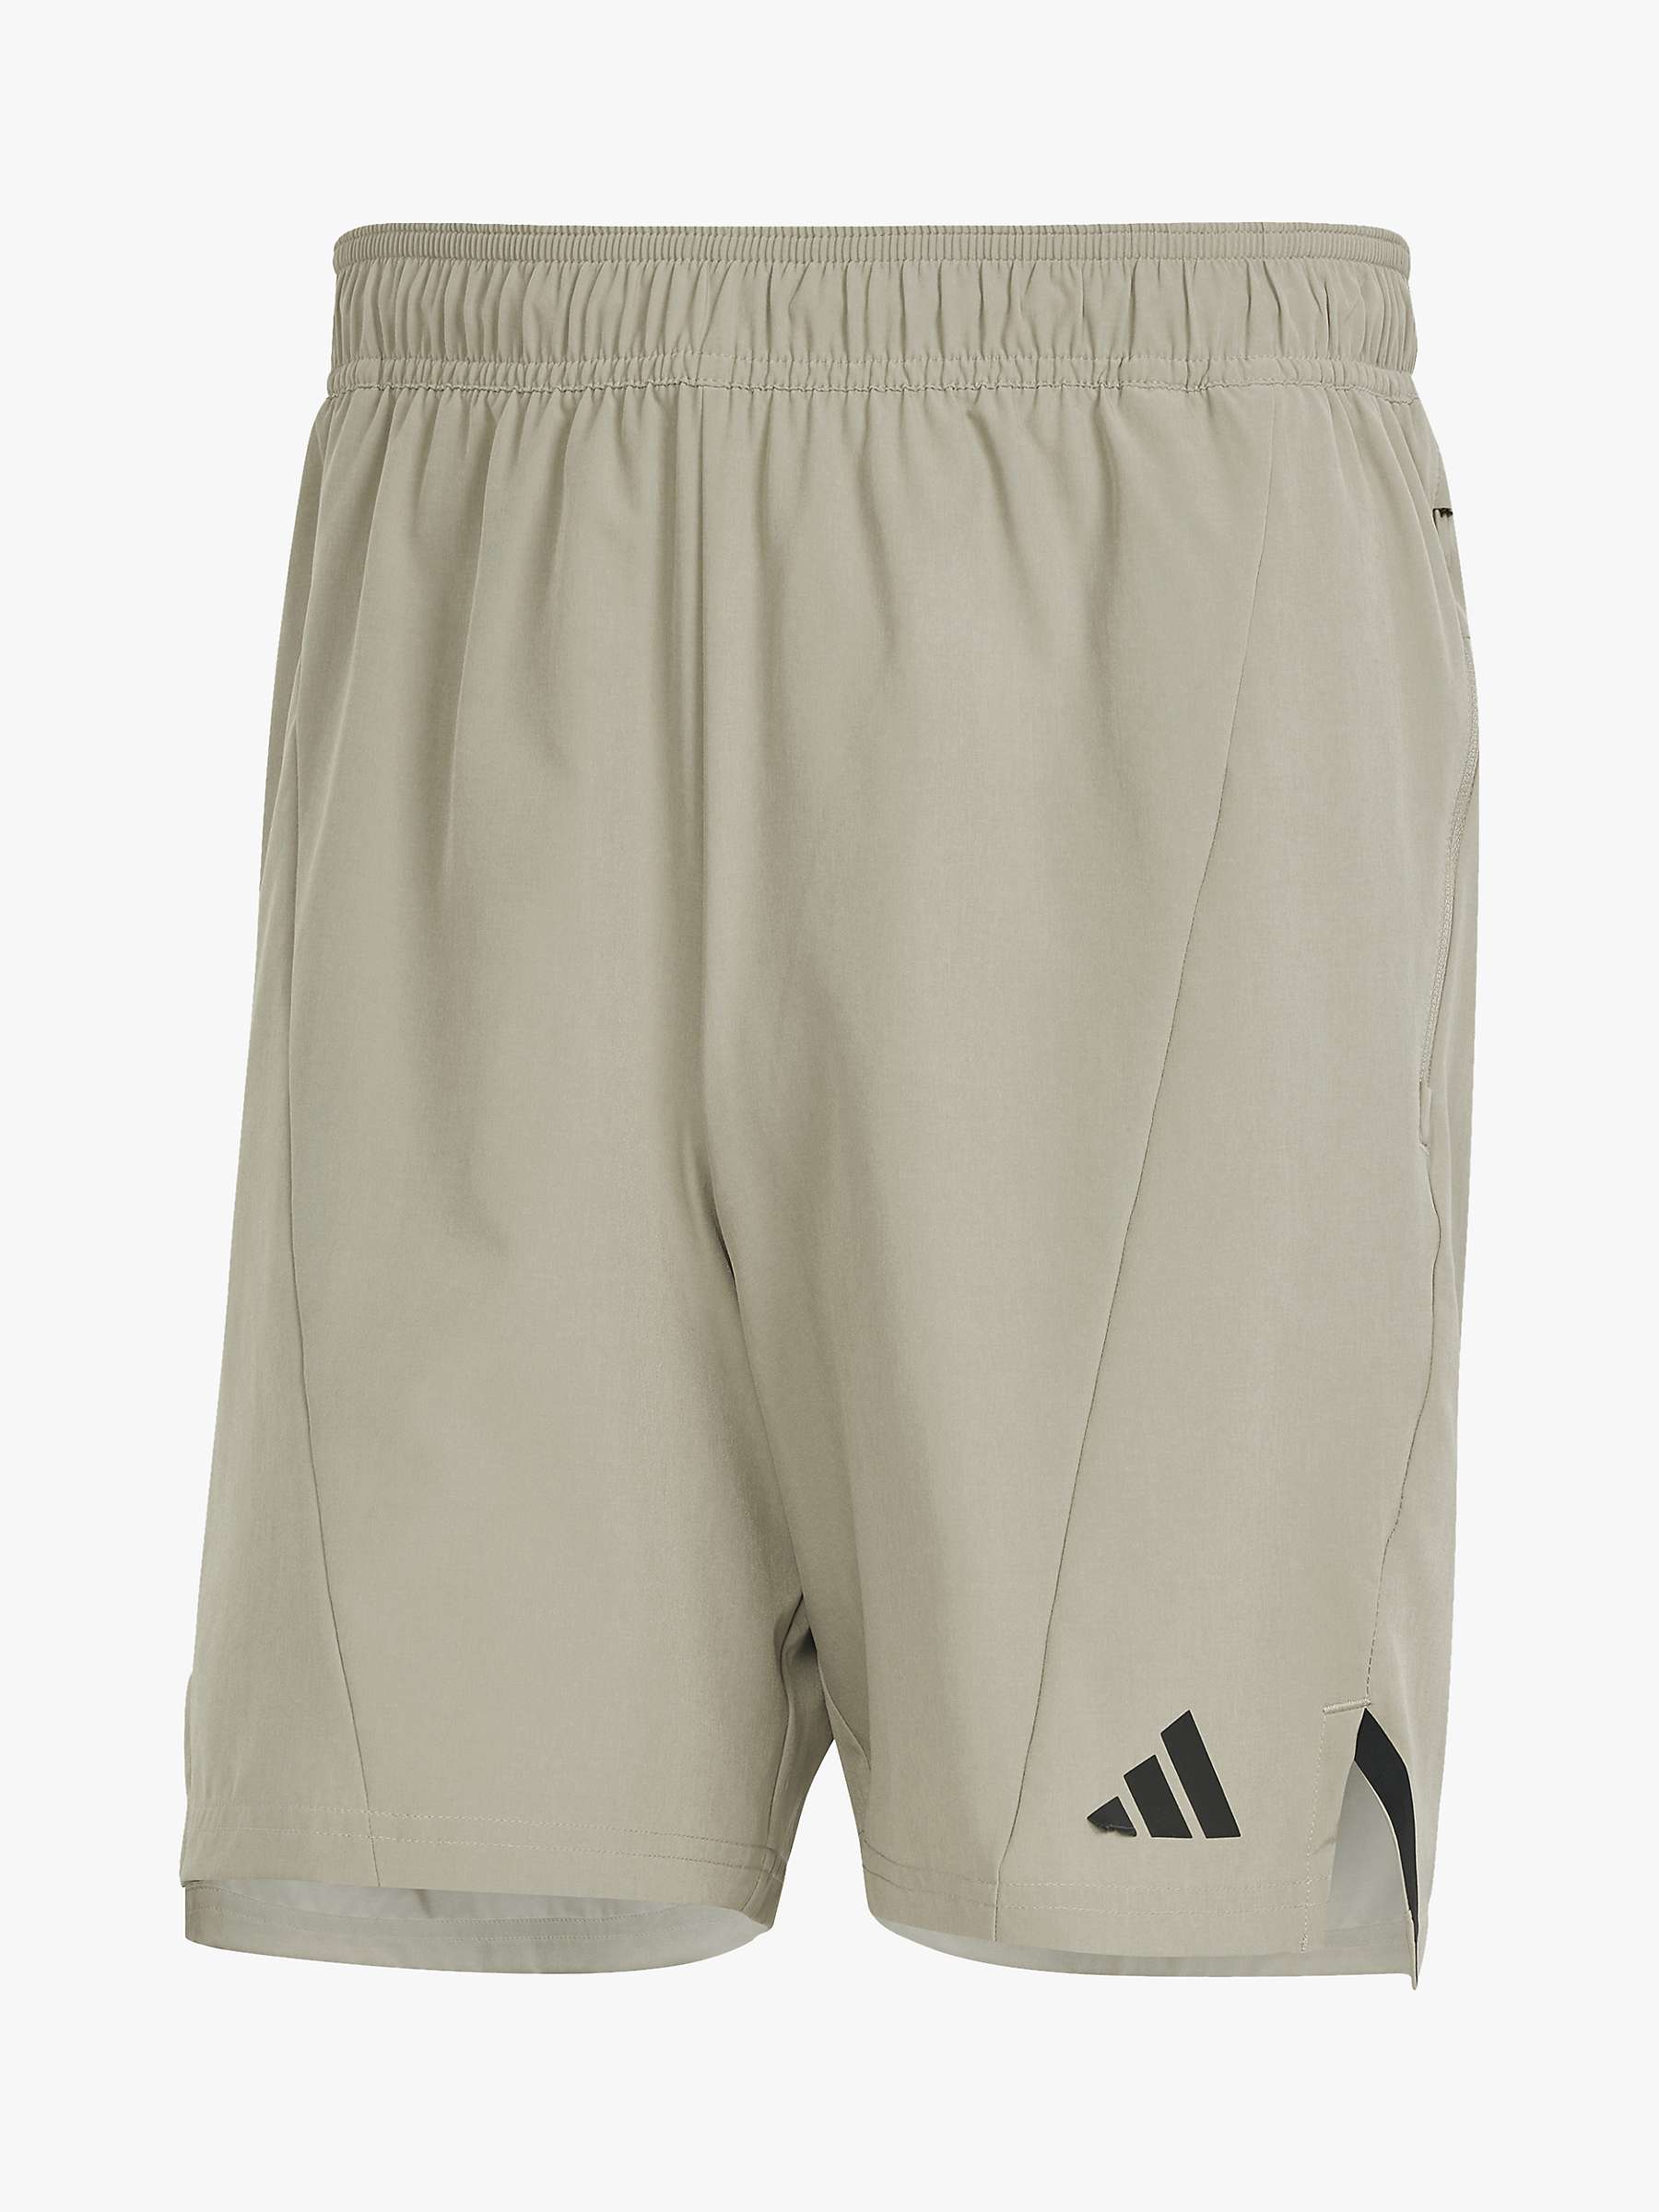 Buy adidas D4T Workout Shorts, Silver Pebble Online at johnlewis.com